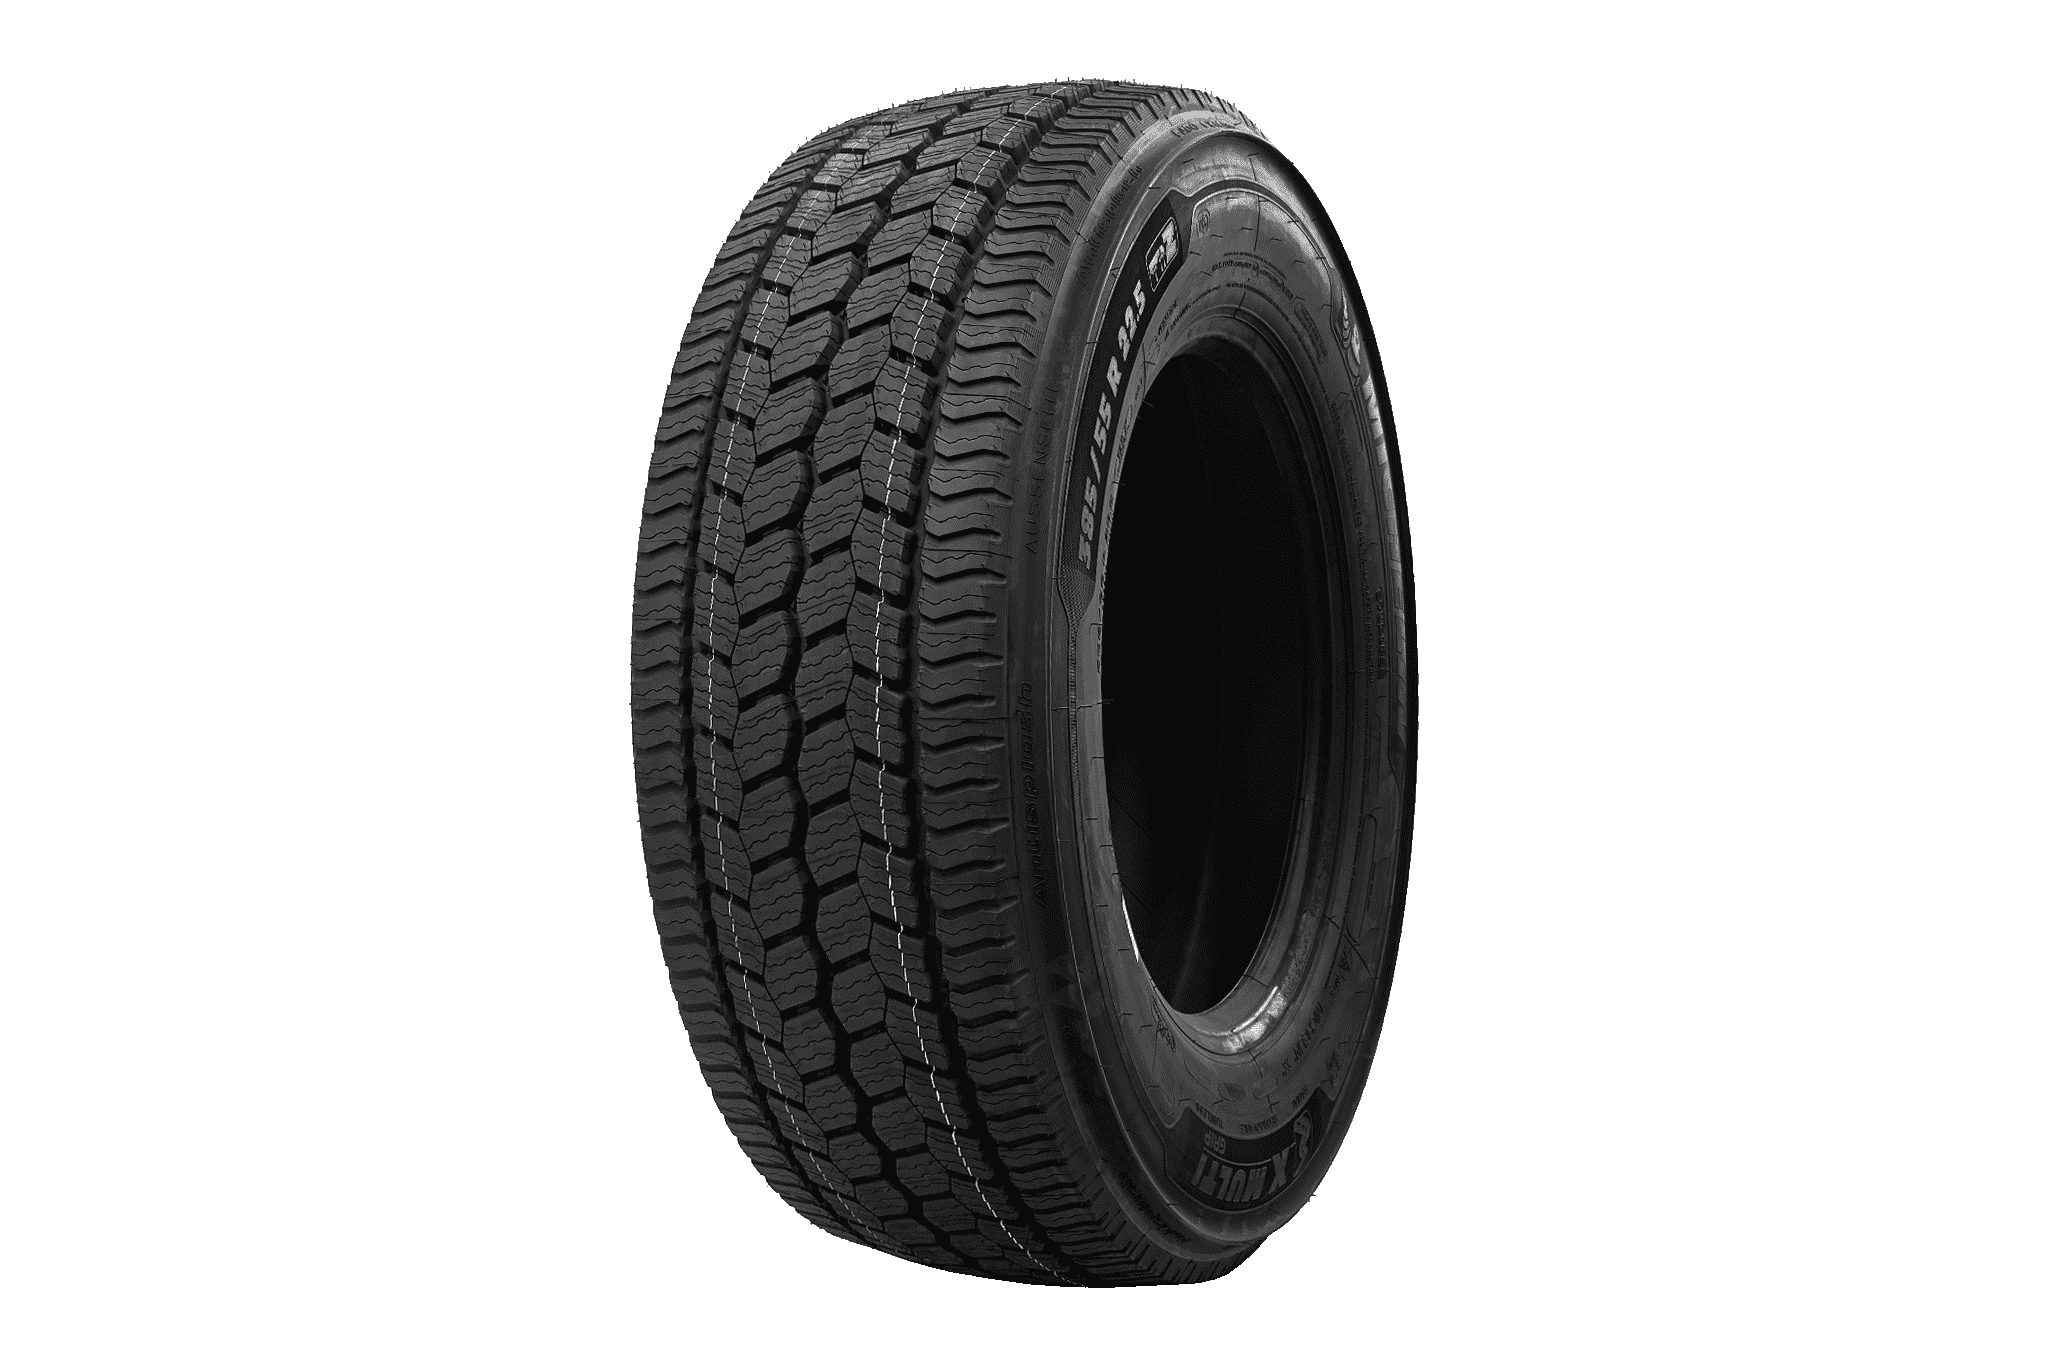 https://www.internationaltyres.com/wp-content/uploads/2022/09/38555225MIXMGZ-1.png